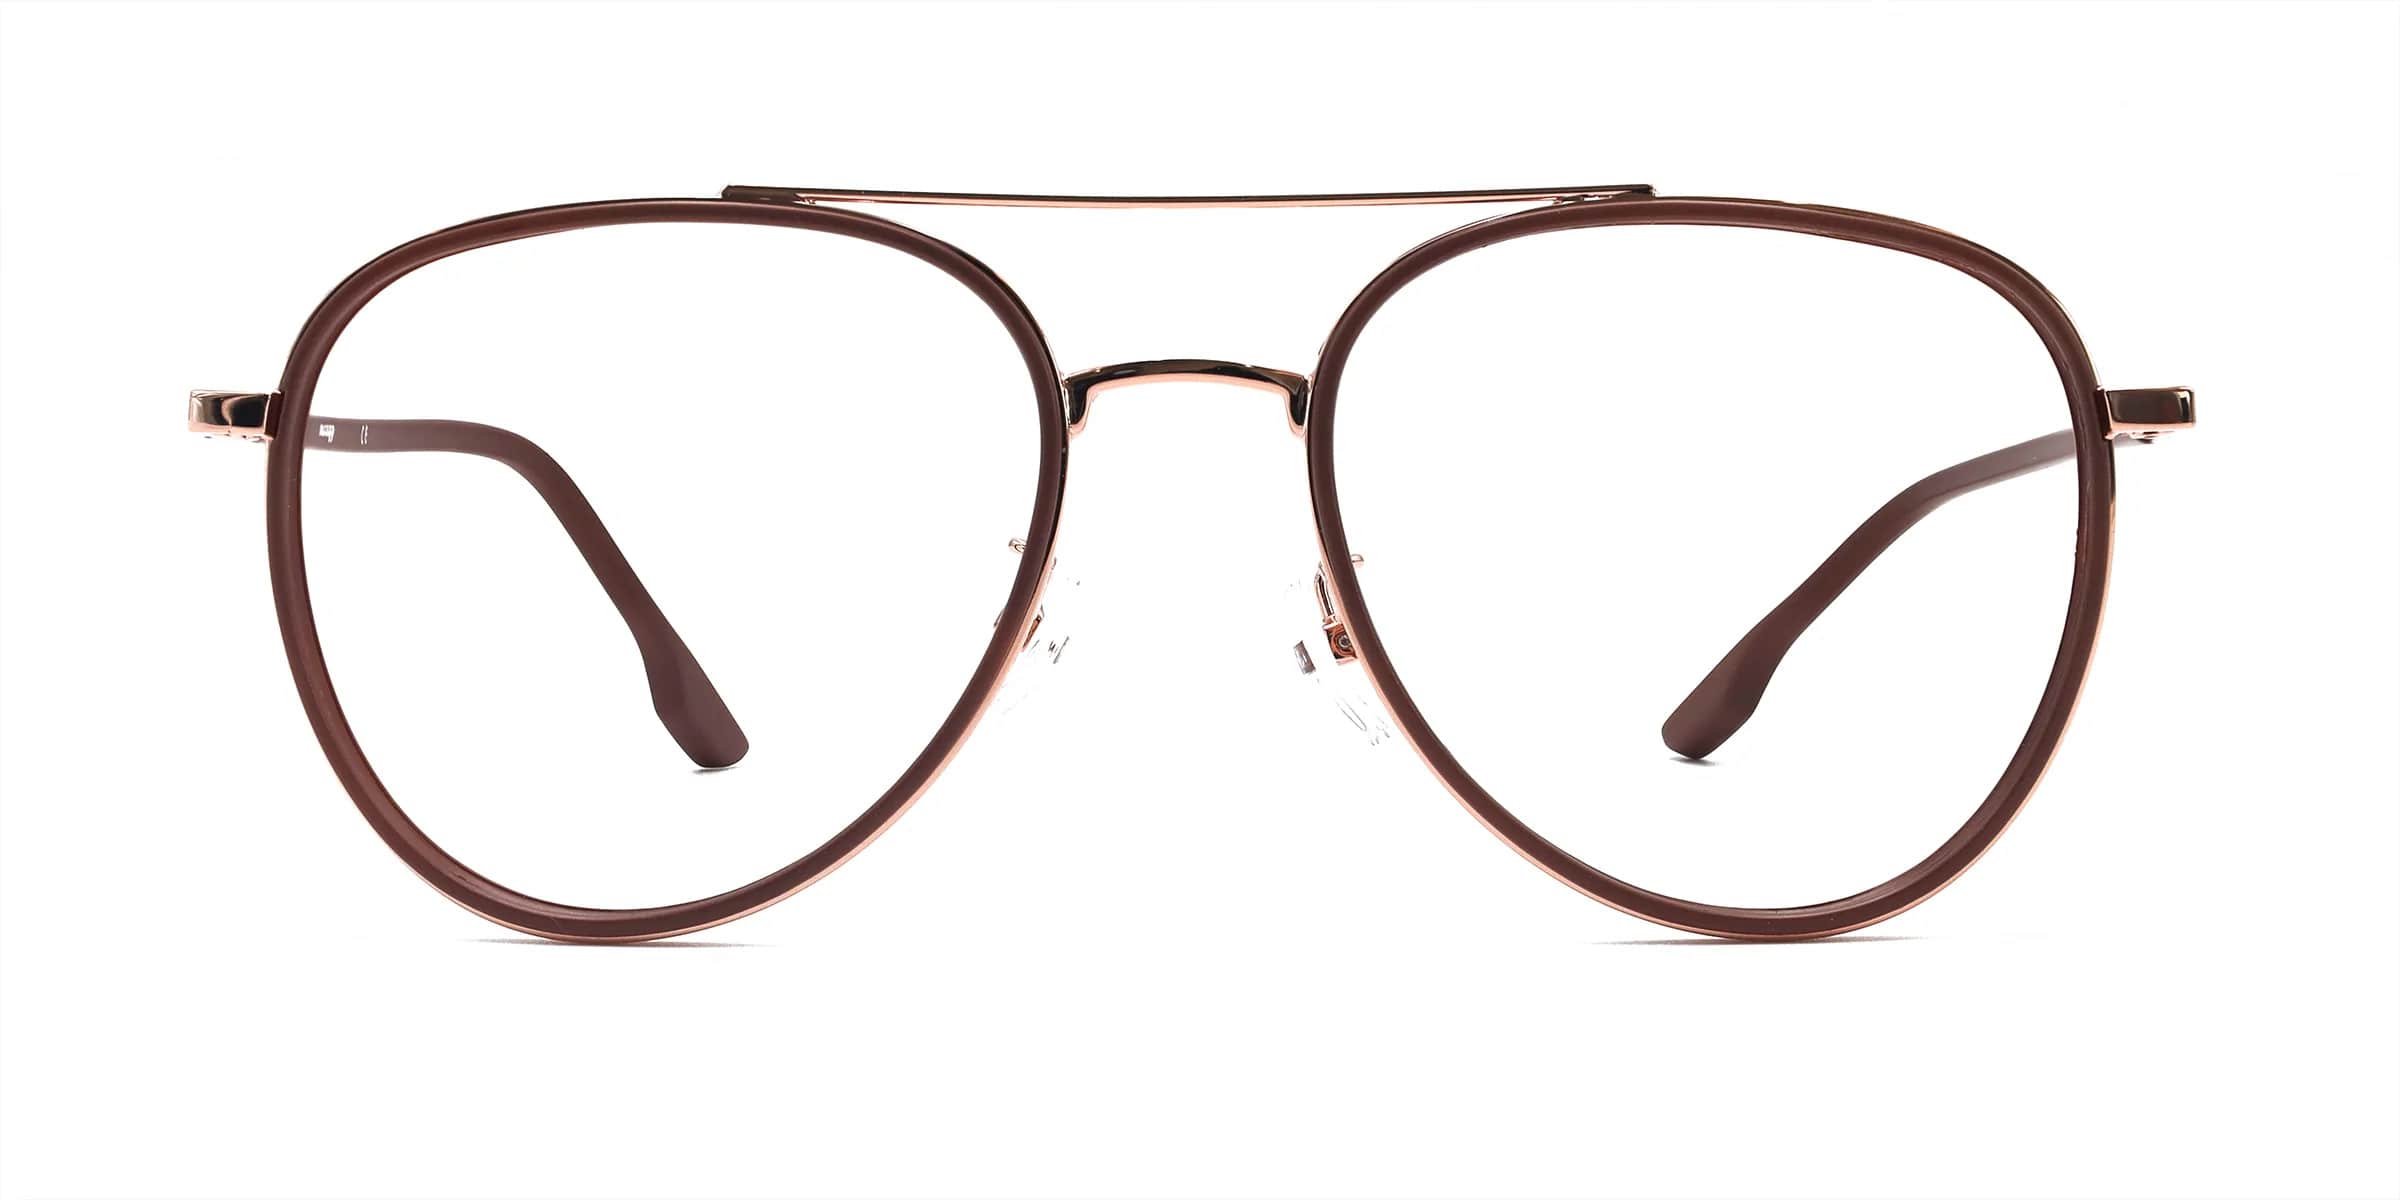 mouqy justin aviator brown frame